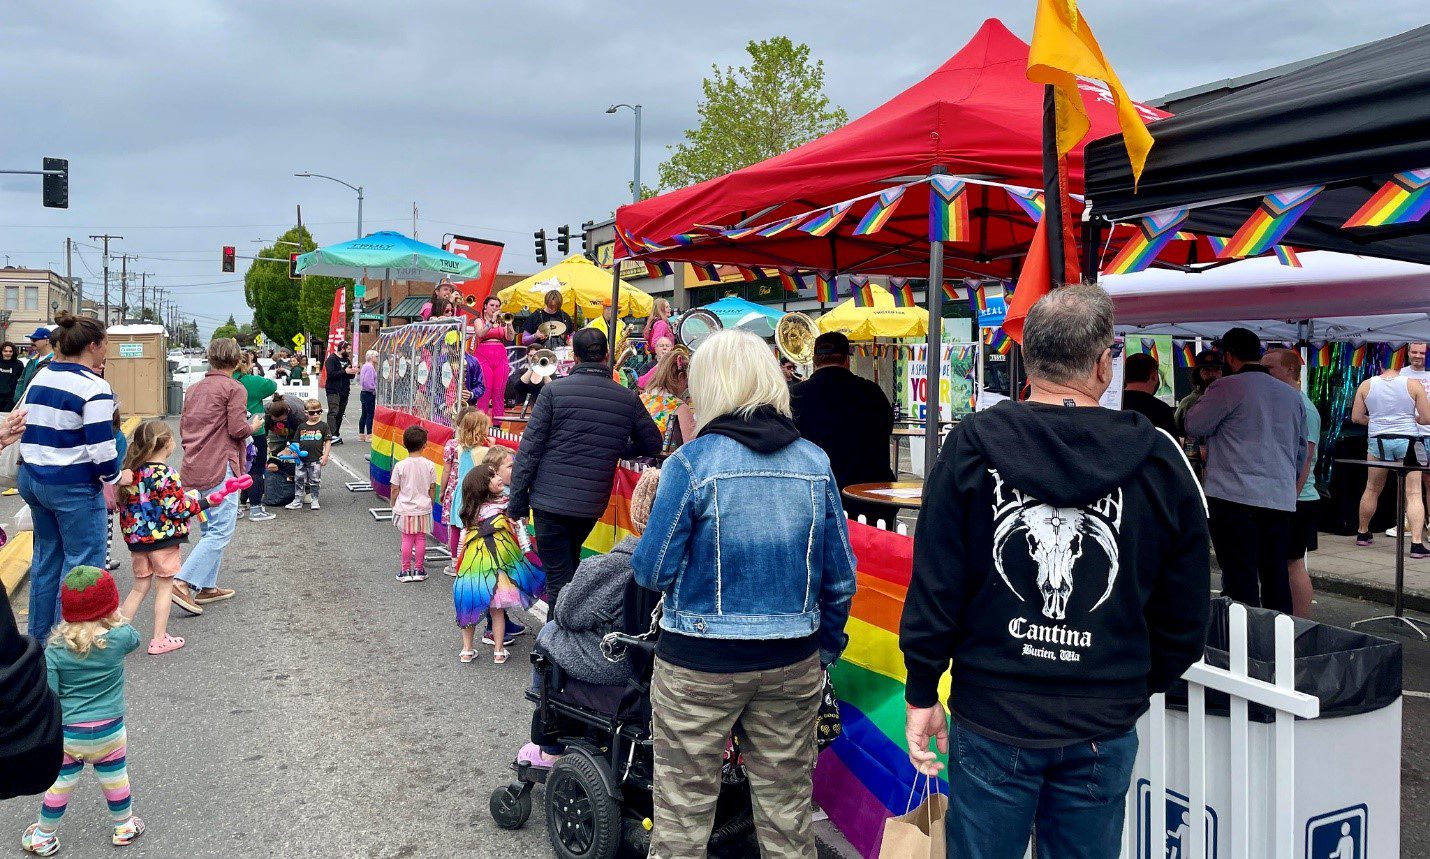 Community members kick off Pride Month at the White Center Pride Street Festival. People lined up next to a red tent on the right.